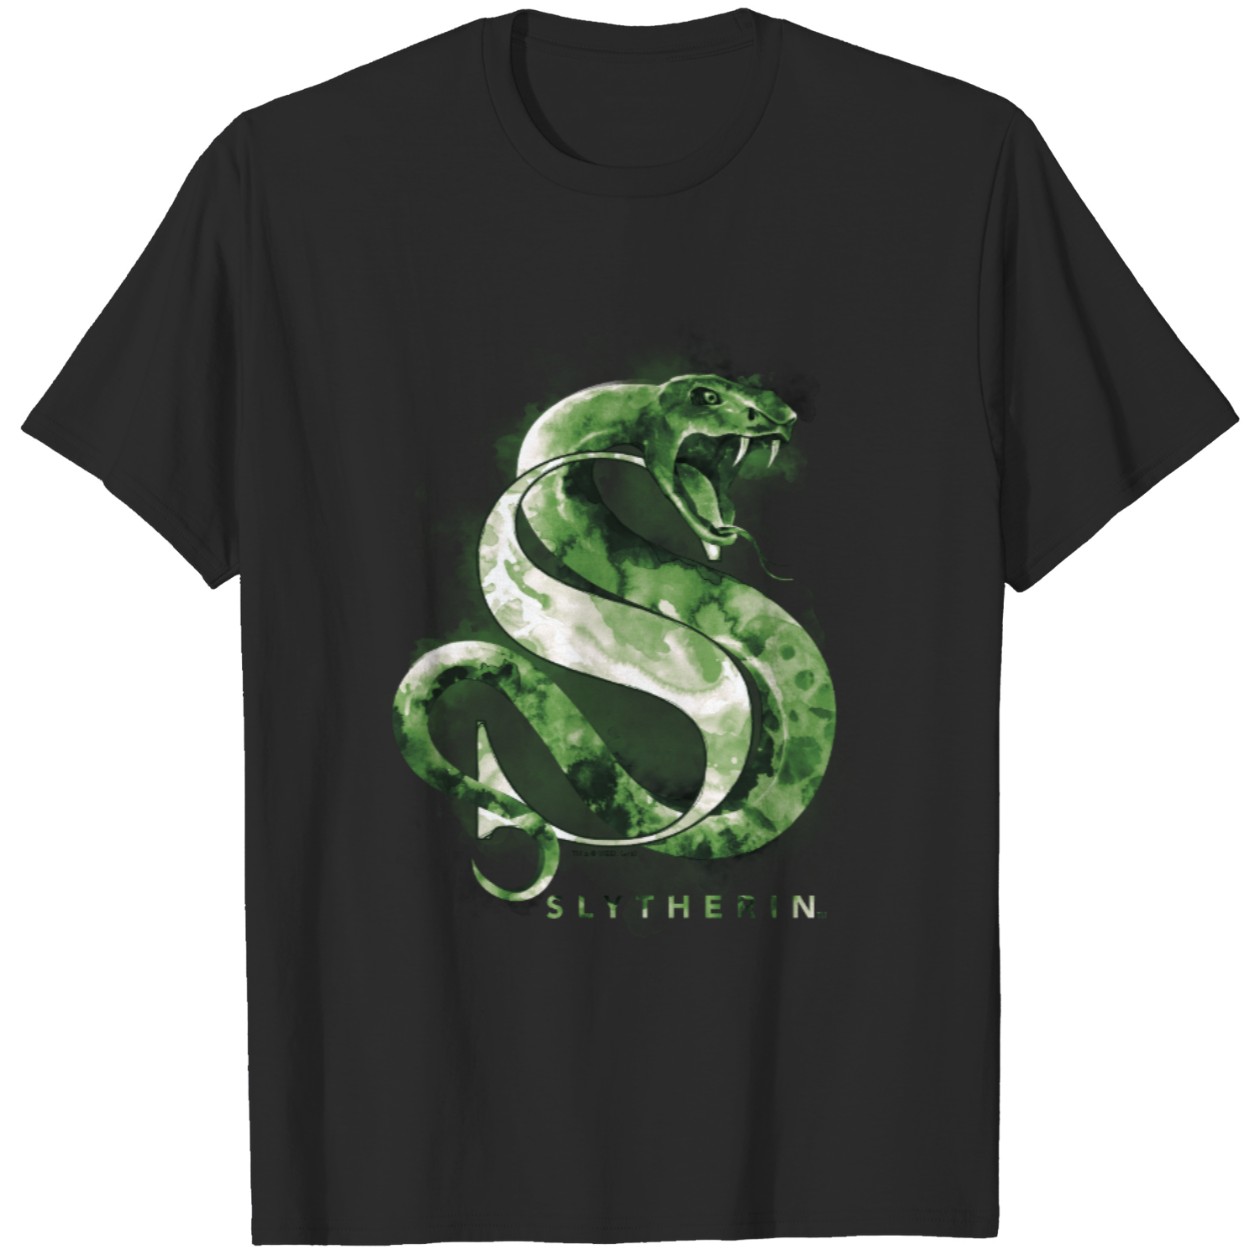 Slytherin Snake Watercolor Tee from Harry Potter Collection IYT